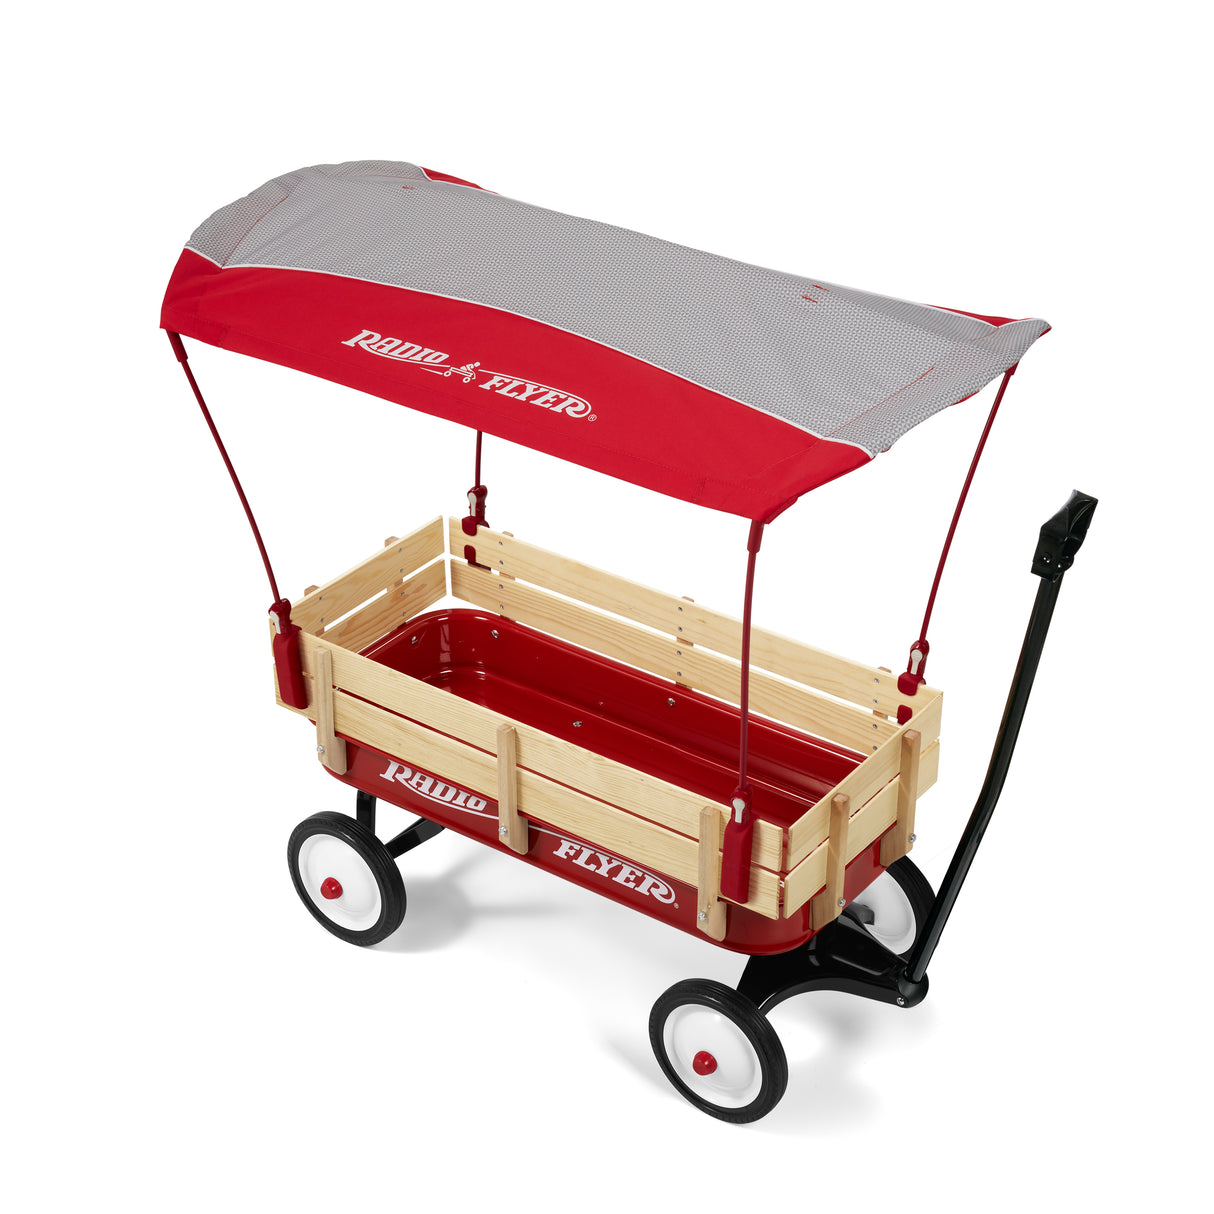 Steel & Wood Wagon with Canopy